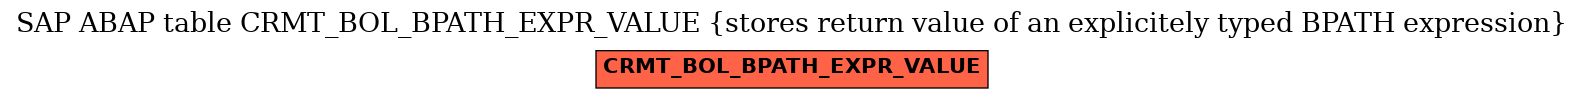 E-R Diagram for table CRMT_BOL_BPATH_EXPR_VALUE (stores return value of an explicitely typed BPATH expression)